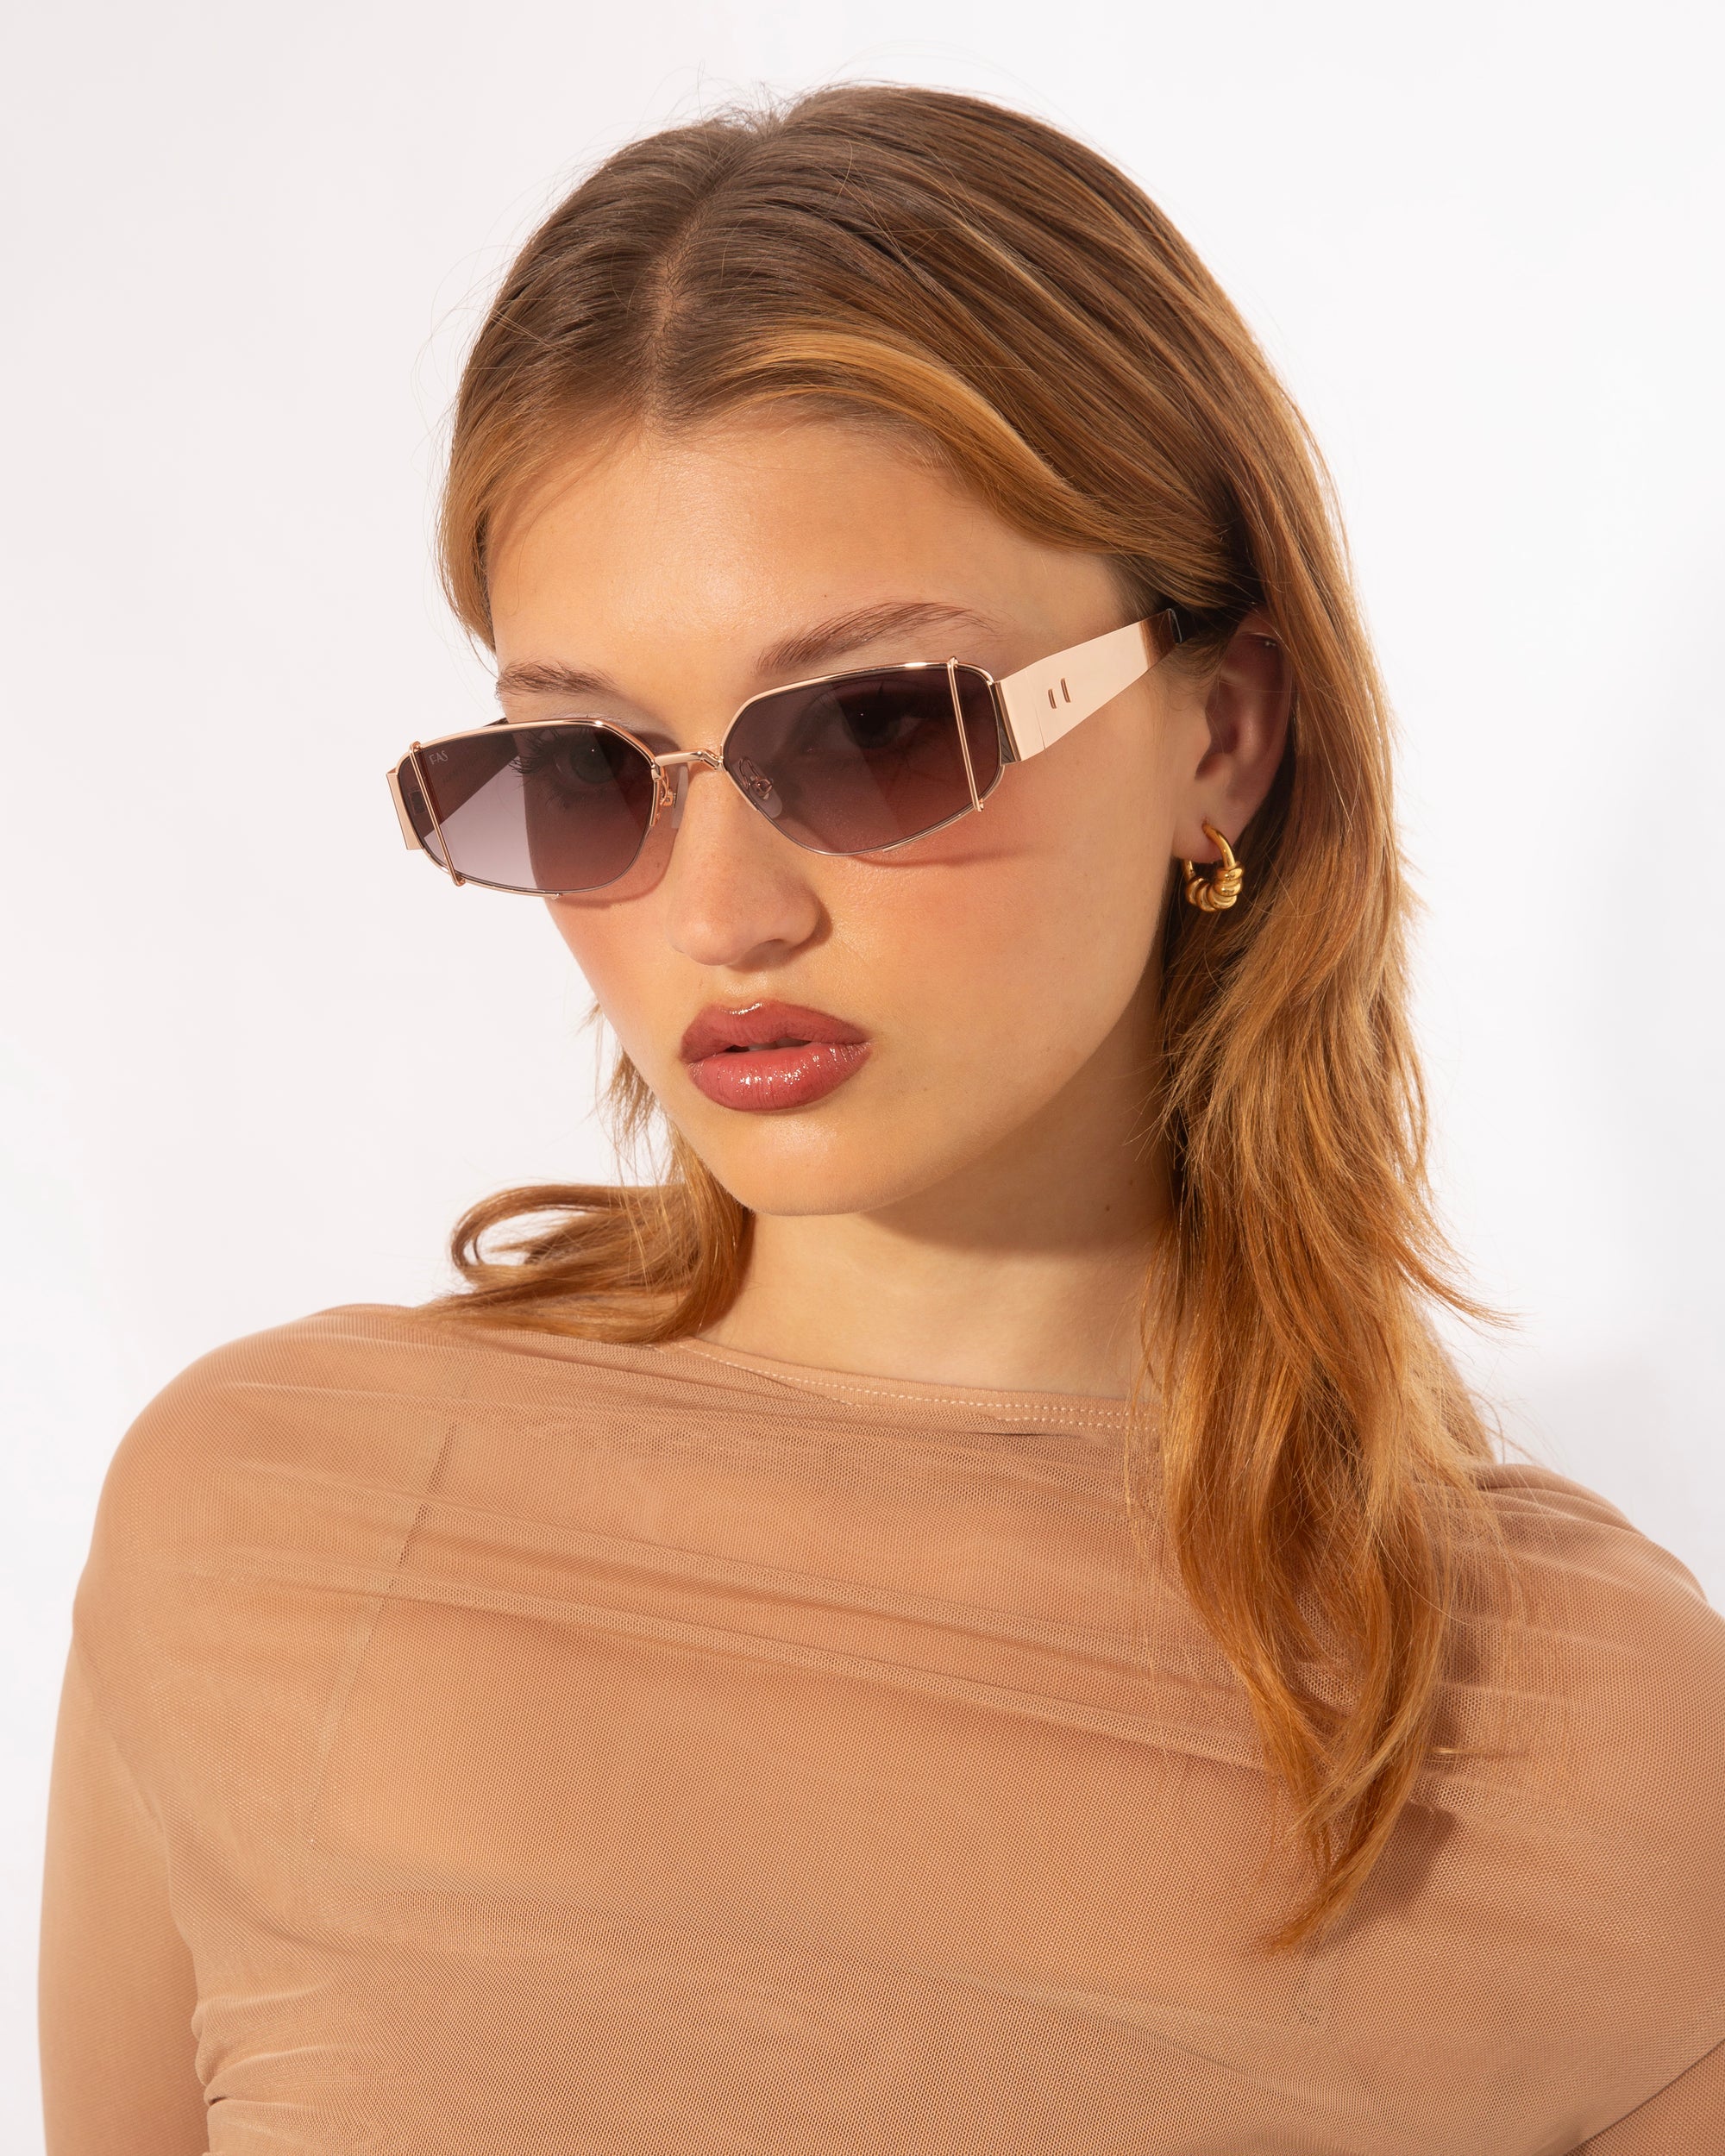 A person with long, light brown hair is wearing rectangular, gradient-lens sunglasses with full metal frames from For Art&#39;s Sake® called Talia. They are also wearing a sheer, light brown top and 18-karat gold hoop earrings. The background is plain white.